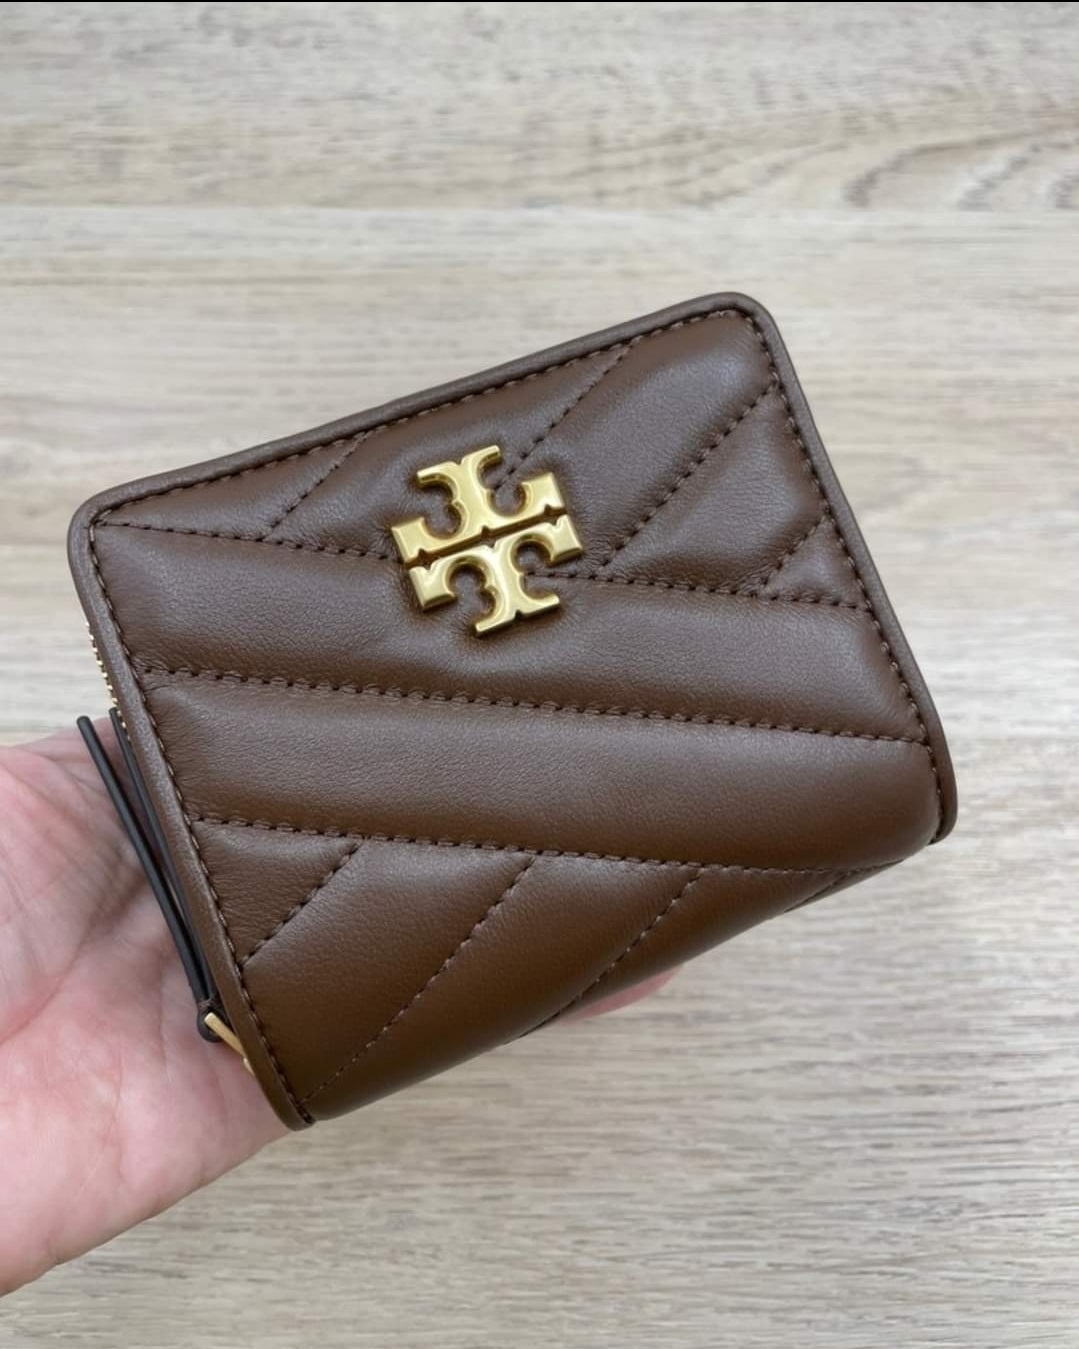 Tory Burch KIRA Chevron Bi Fold Wallet Sandpiper Brown Gold New with Tag -  $159 New With Tags - From Cassie